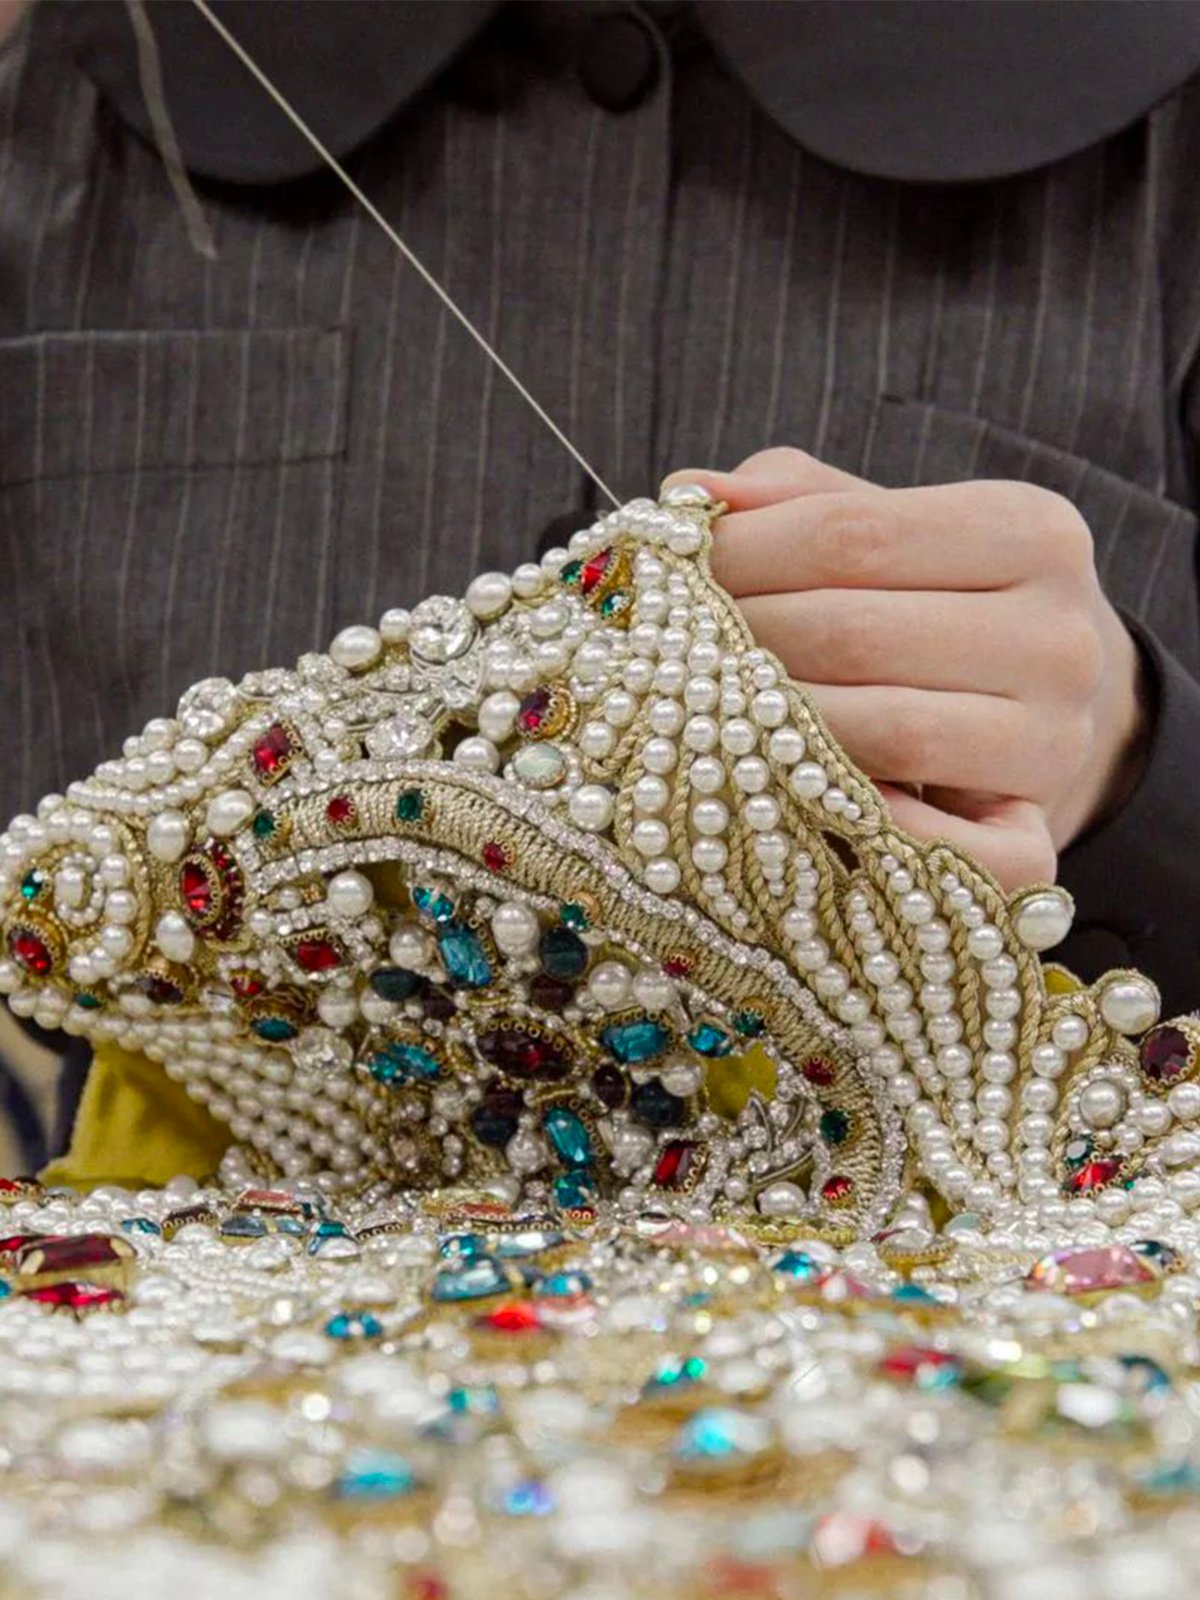 From heart to hands: Dolce&Gabbana pays tribute to craftsmanship